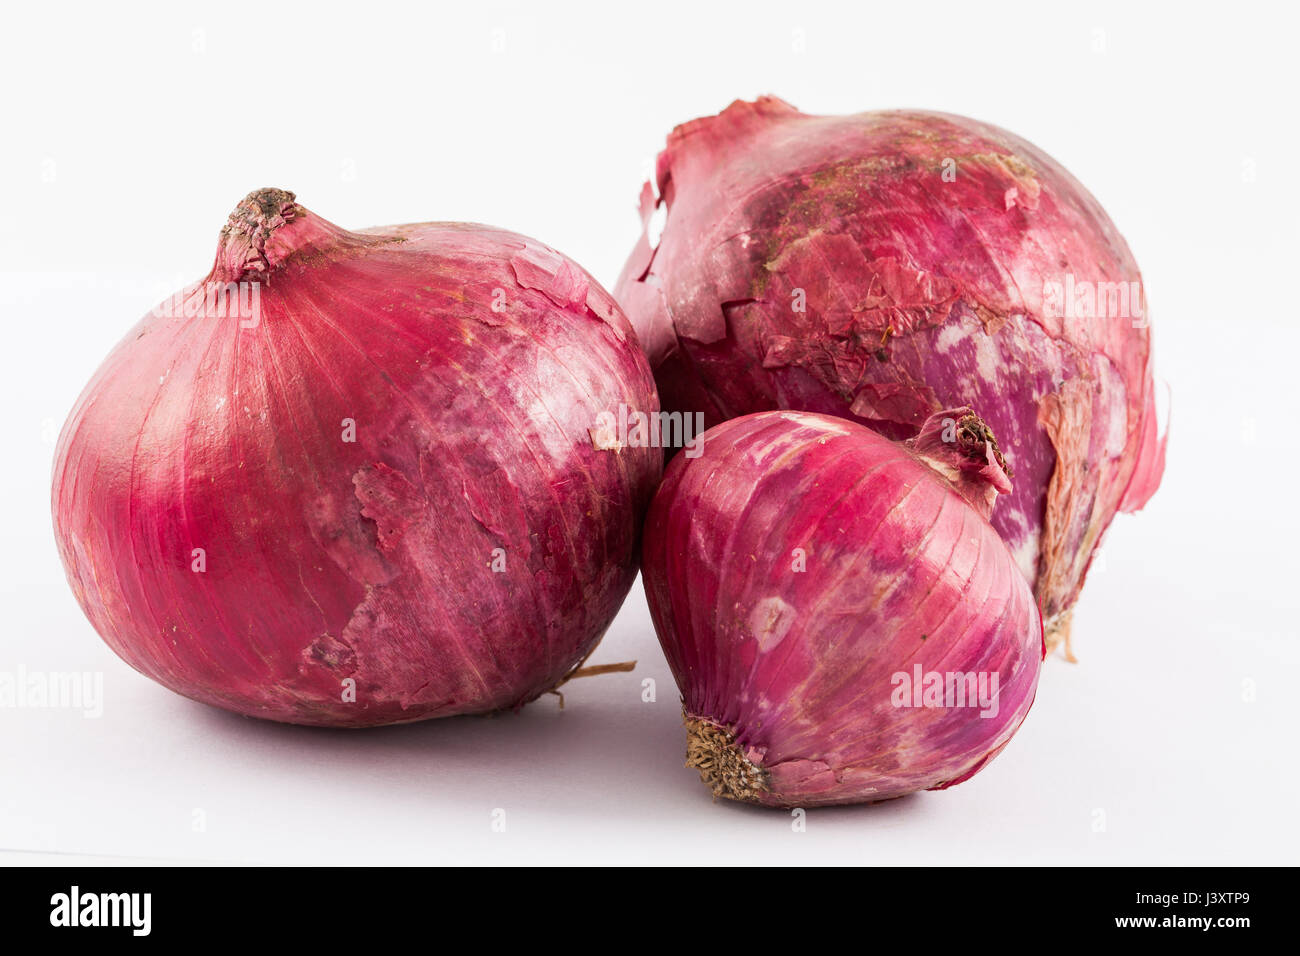 Red bulb onion (Allium cepa) isolated in white background Stock Photo